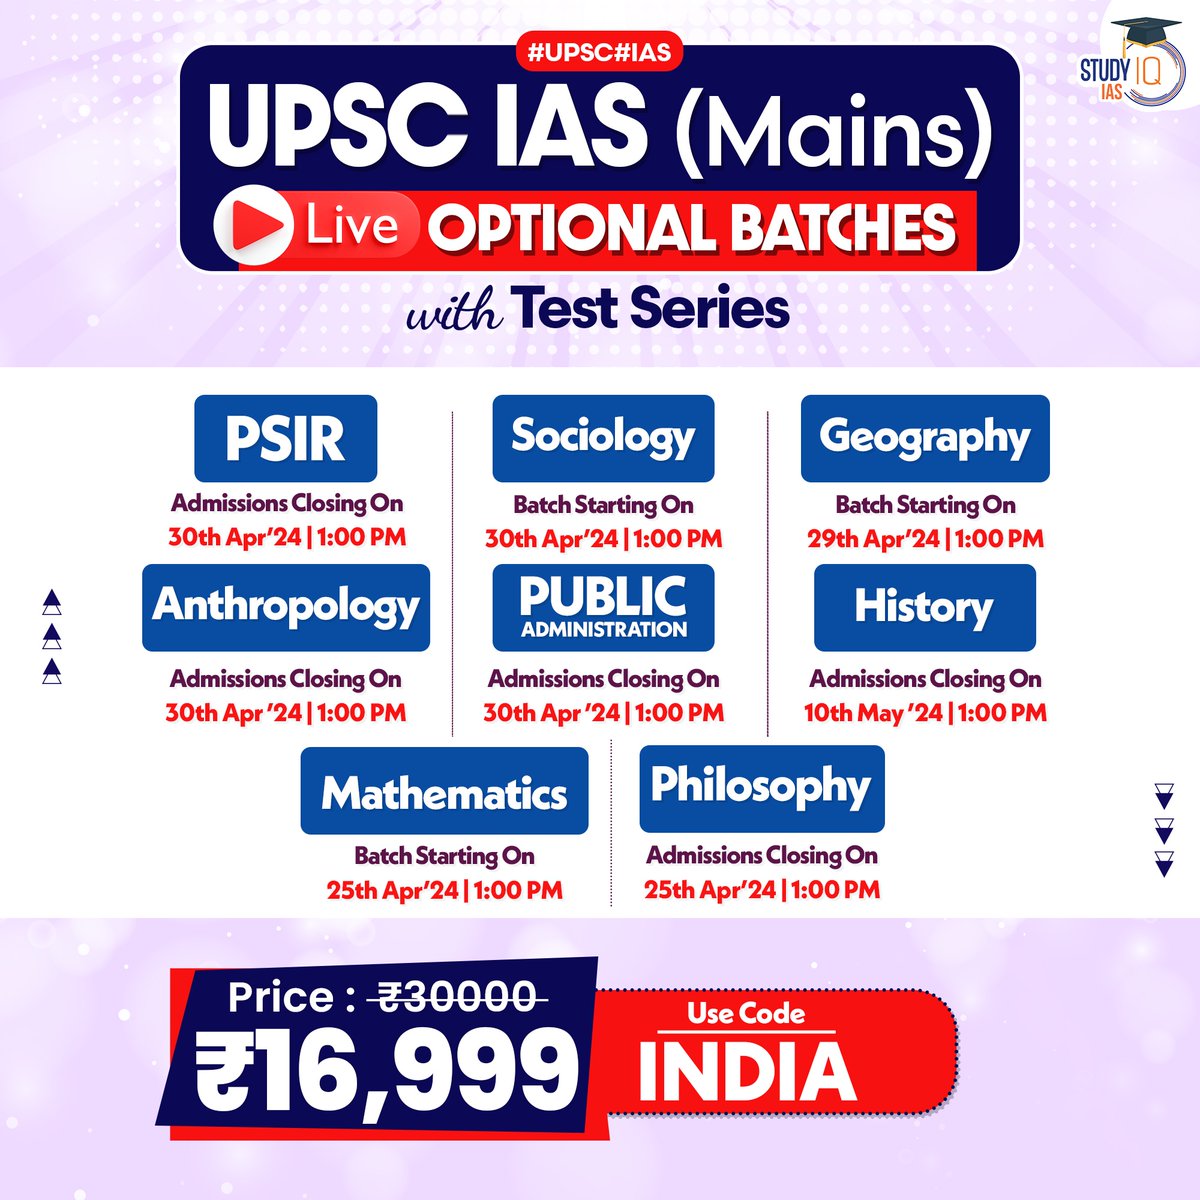 Dear Students, Optional plays a key role in UPSC CSE selections. StudyIQ IAS offers 8 Optionals taught by best faculties to help you Ace the examination. For any queries please reach out to: 080-6897-3353 Check out the courses here: bit.ly/3FEJnnJ